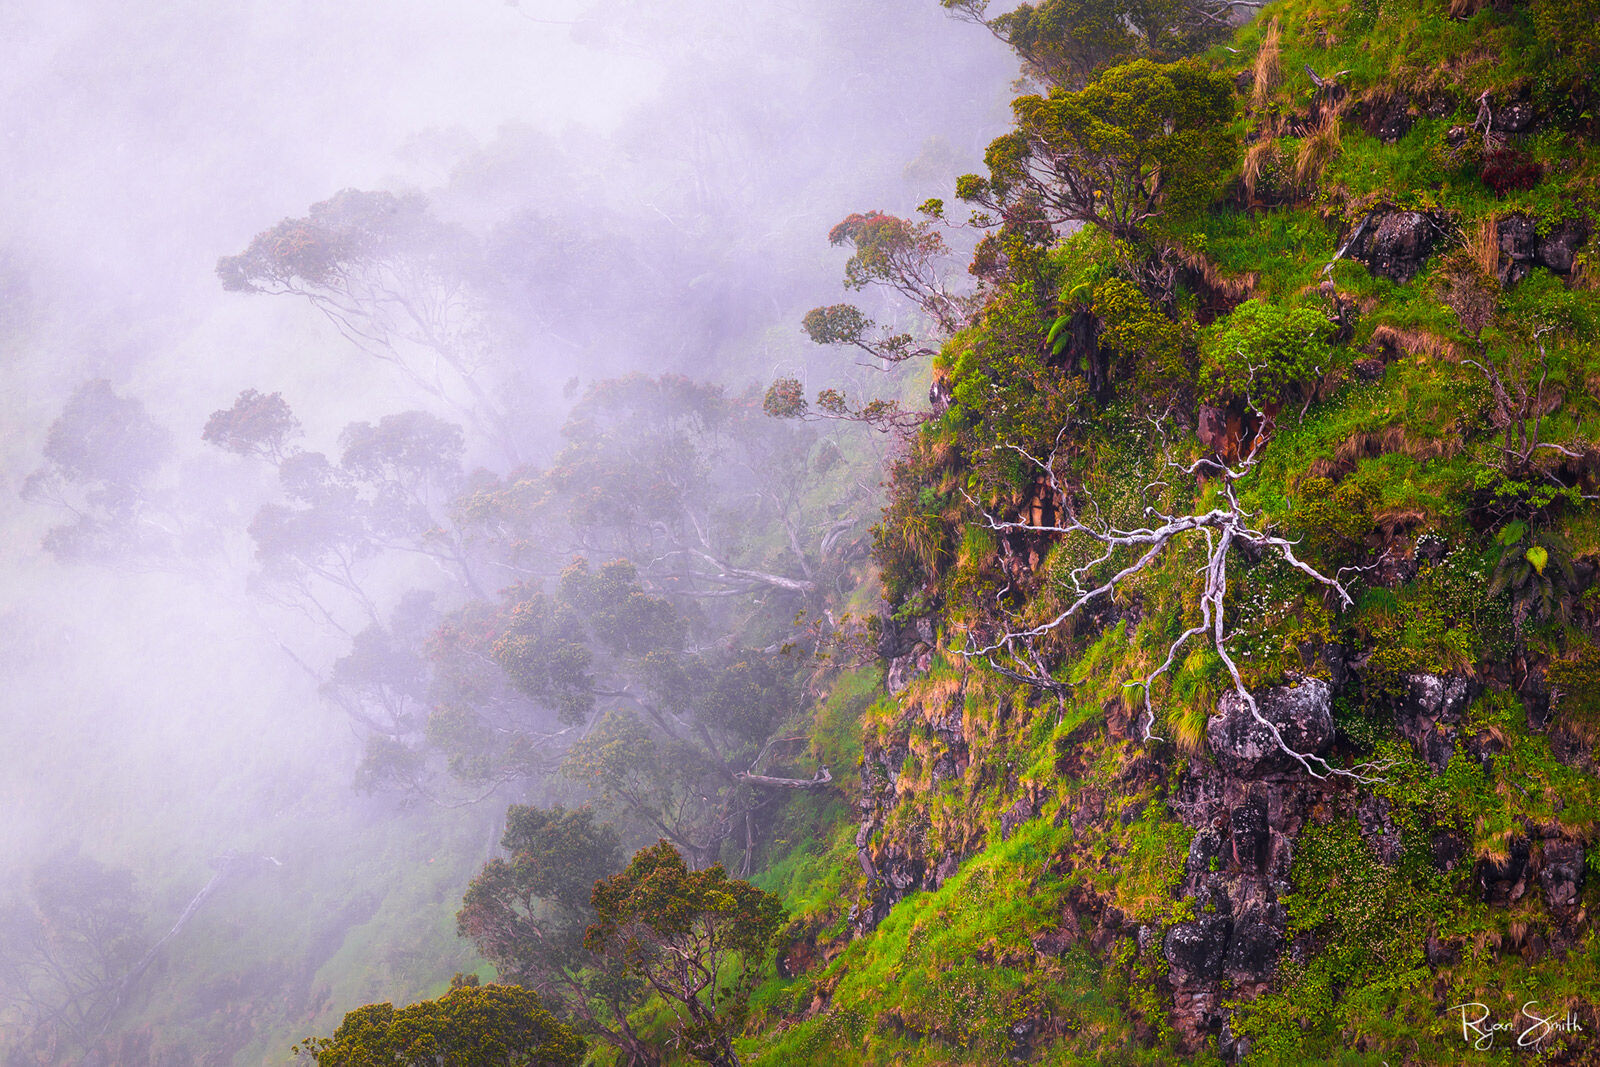 A tropical forest with a mossy floor sits on a hillside shrouded in ominous fog.